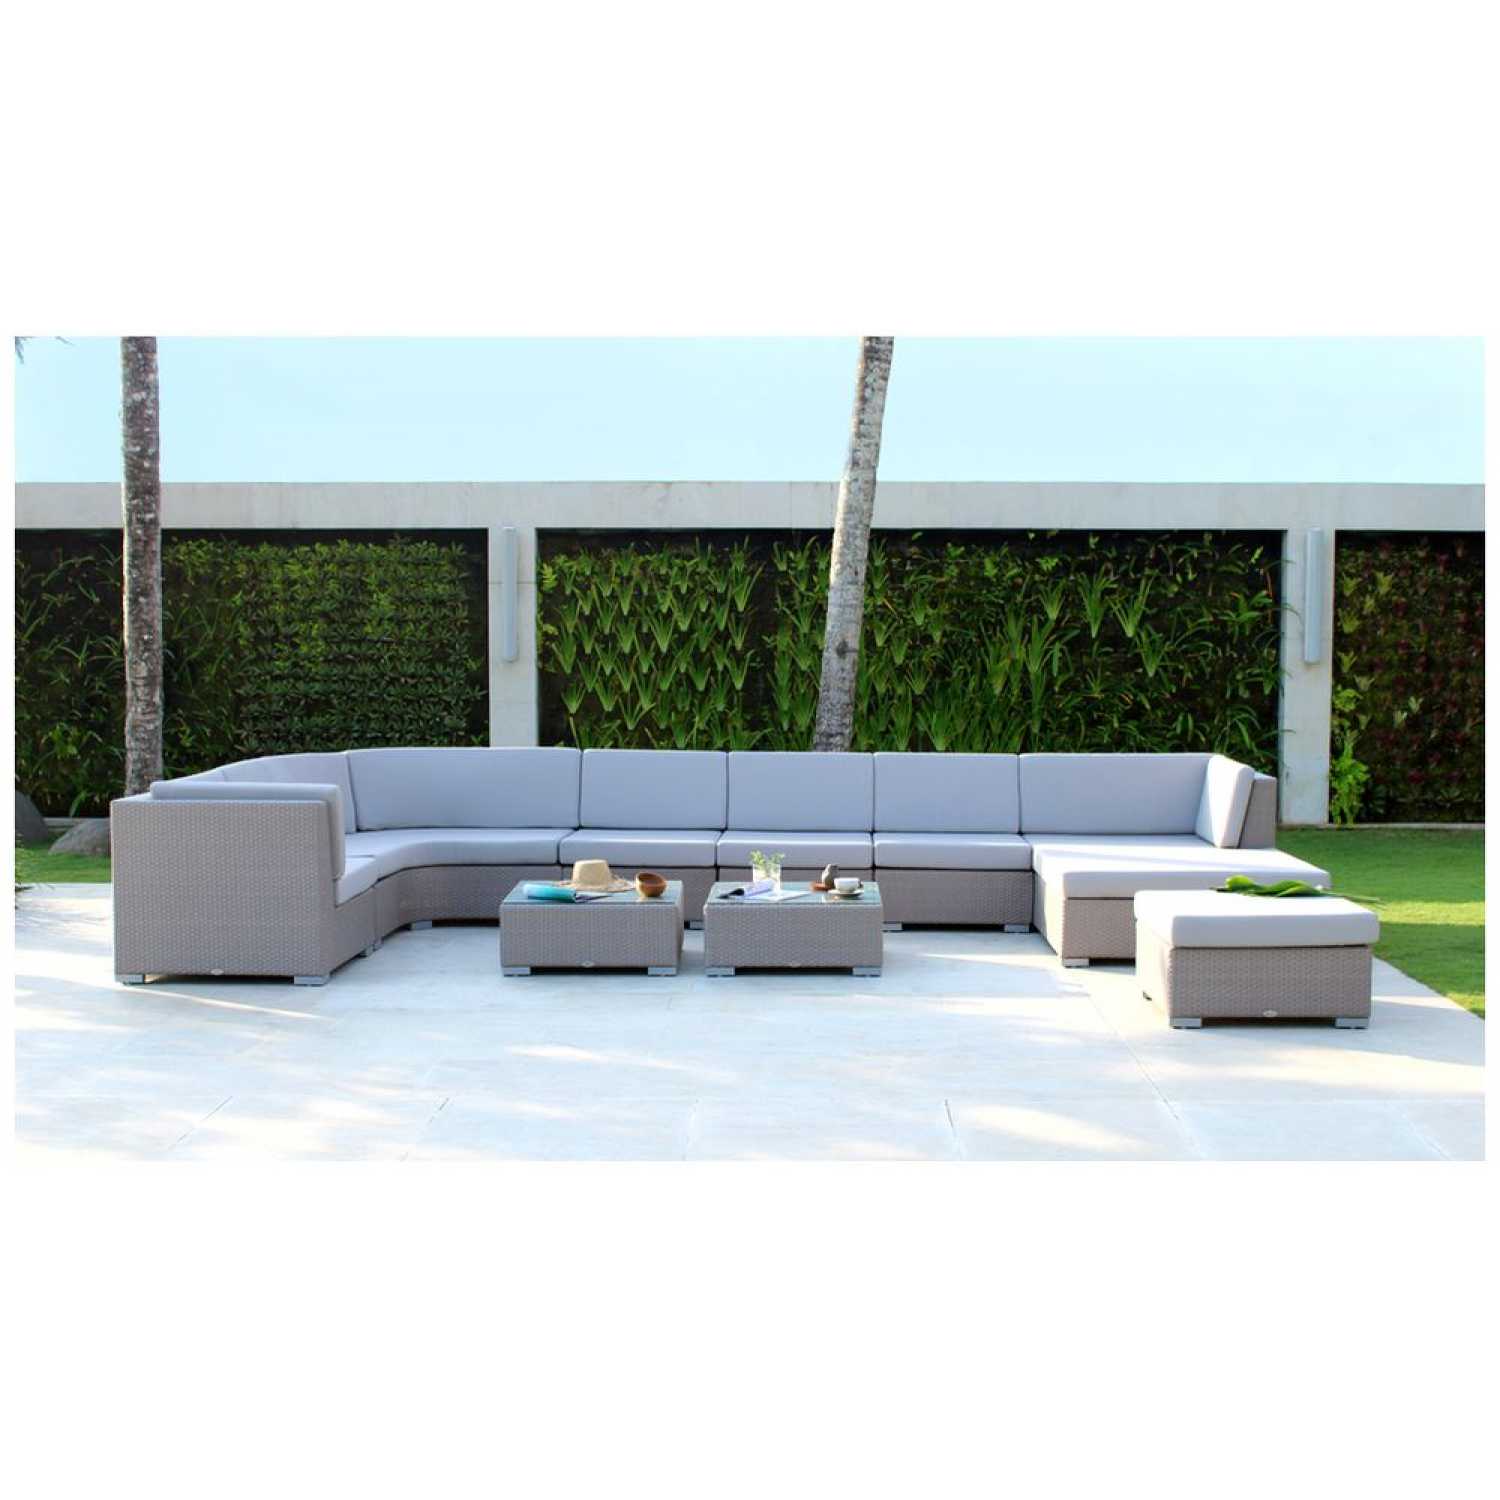 Pacific Silver Walnut Seat - PadioLiving - Pacific Silver Walnut Seat - Outdoor Corner Seat - PadioLiving